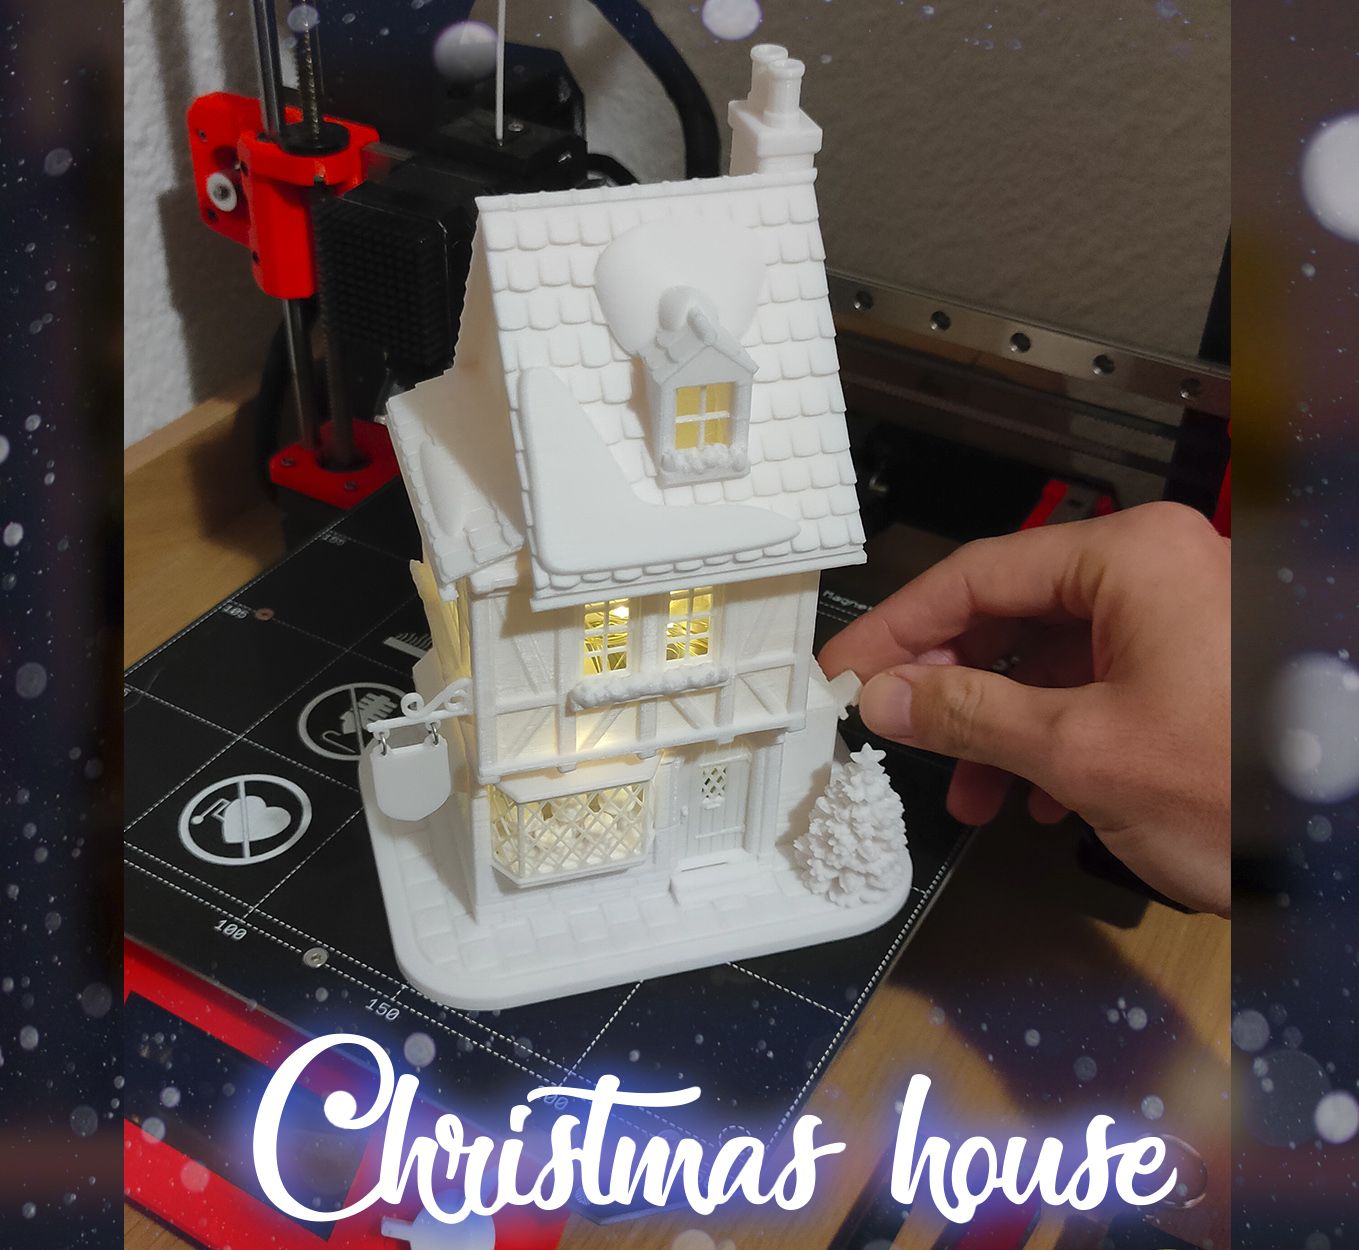 Christmas-House-ON-OFF-SAXF.jpg Download STL file Christmas house village 3D printed Christmas • 3D printing object, ScaleAccessoriesXF